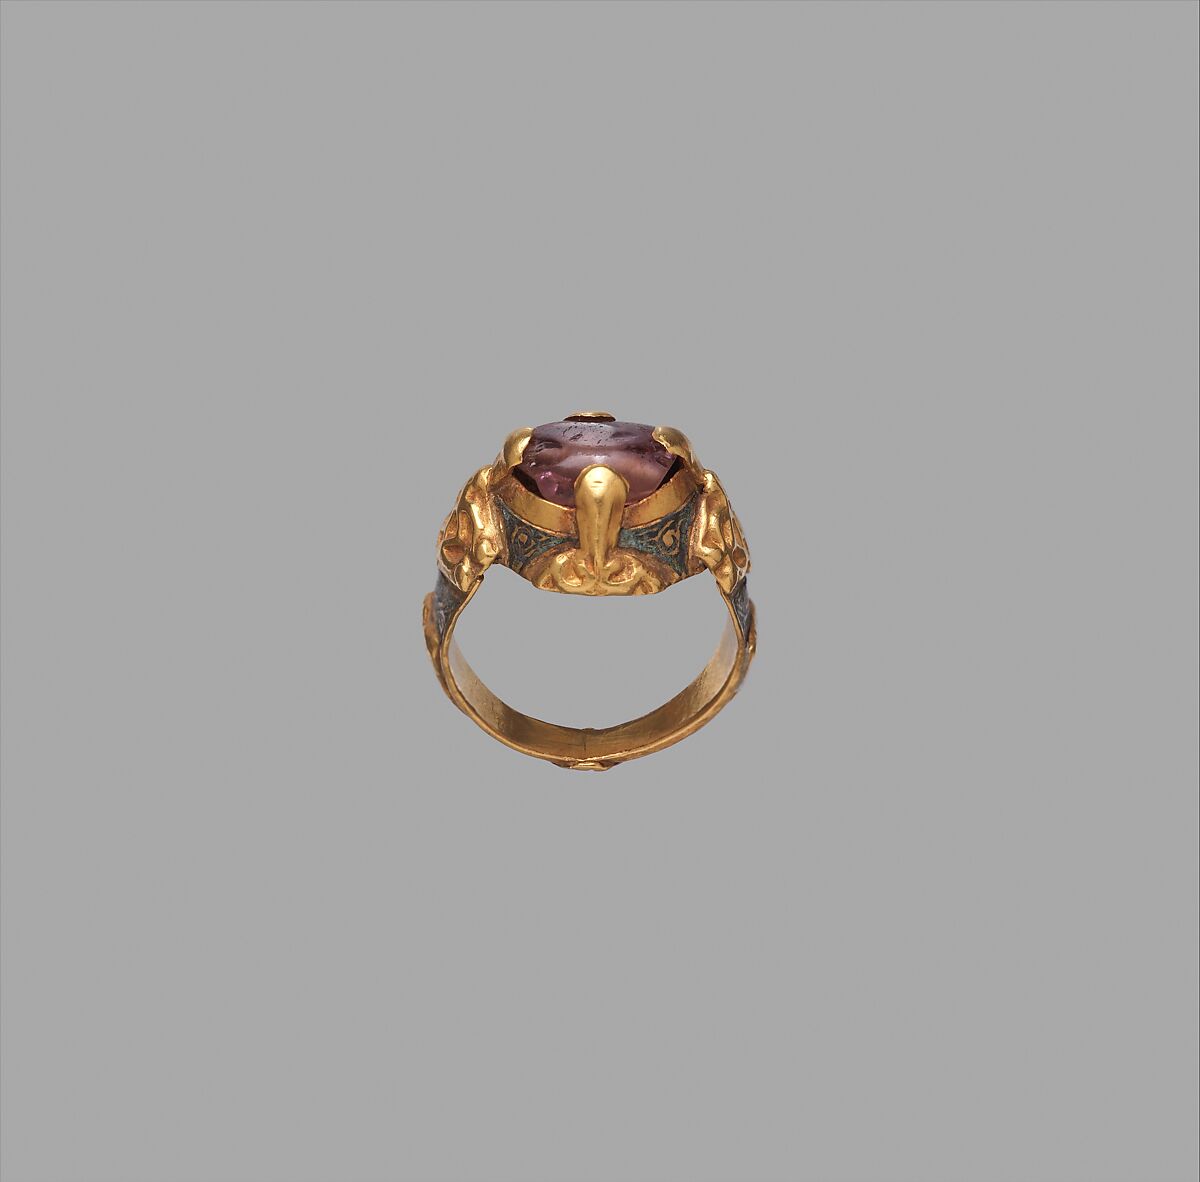 Ring, Gold; cast and fabricated from sheet, decorated with bitumen-highlighted incising, set with tourmaline bead